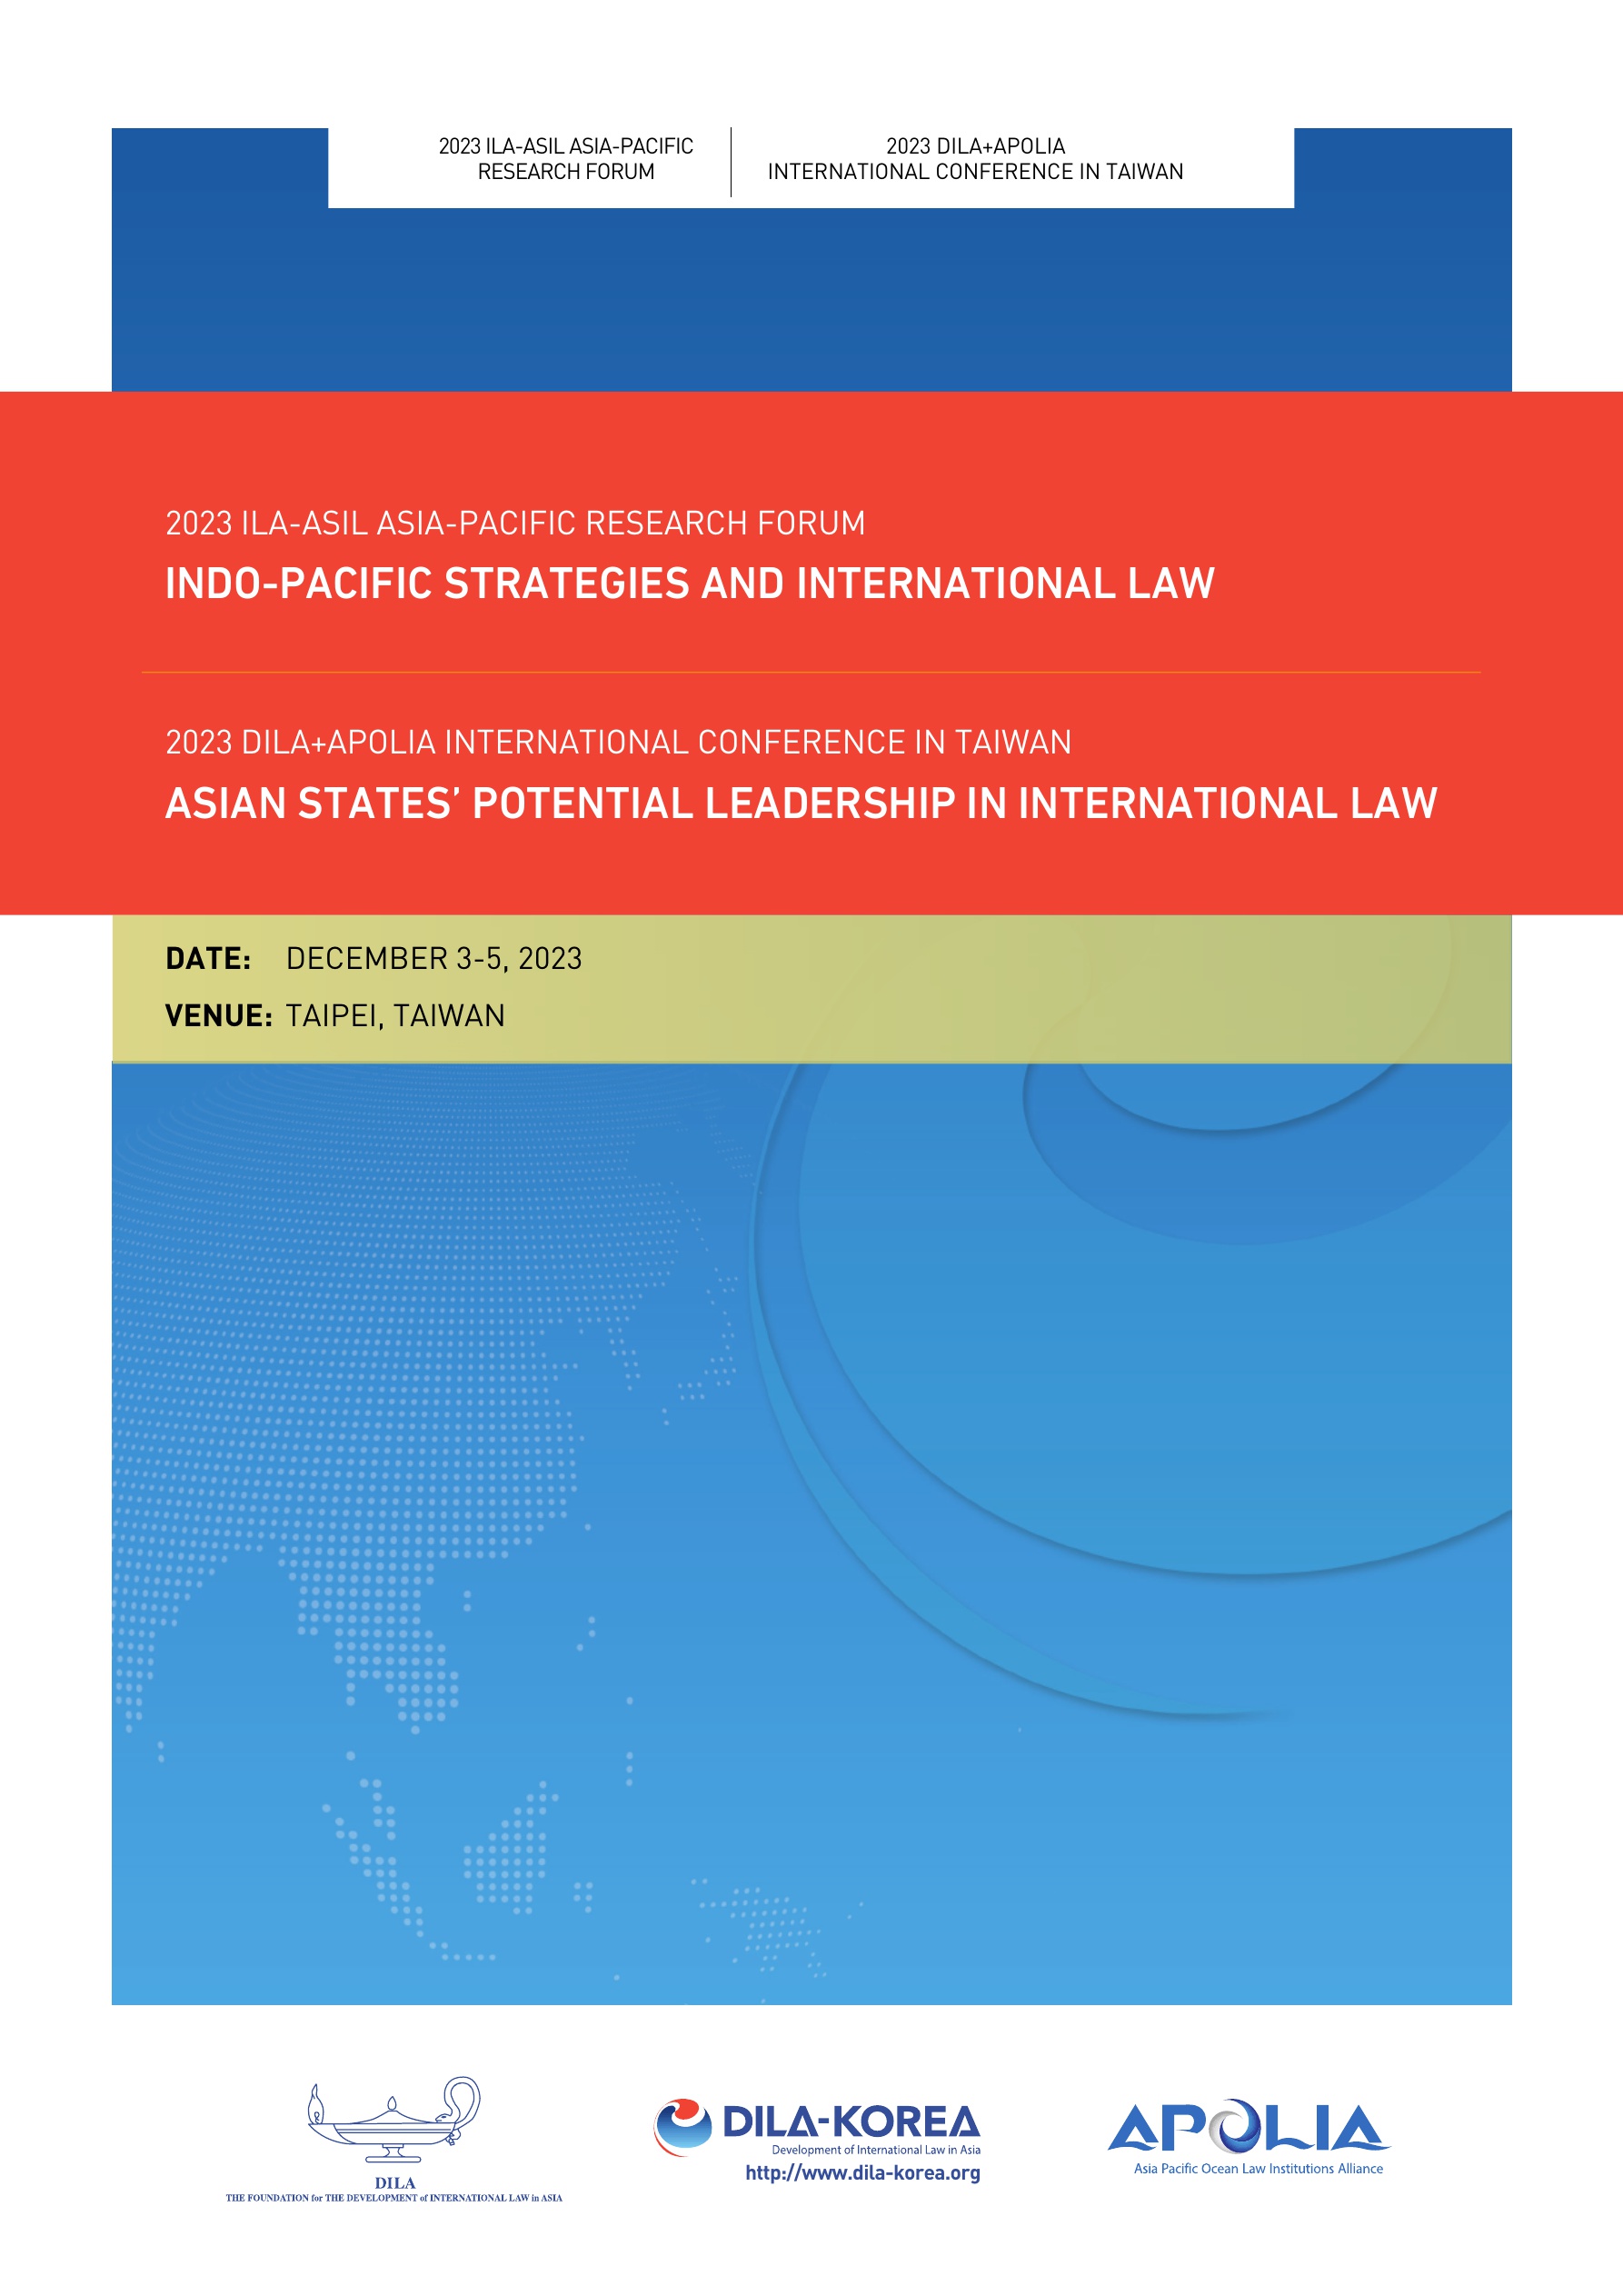 Asian States’ Potential Leadership in International Law                                 썸네일